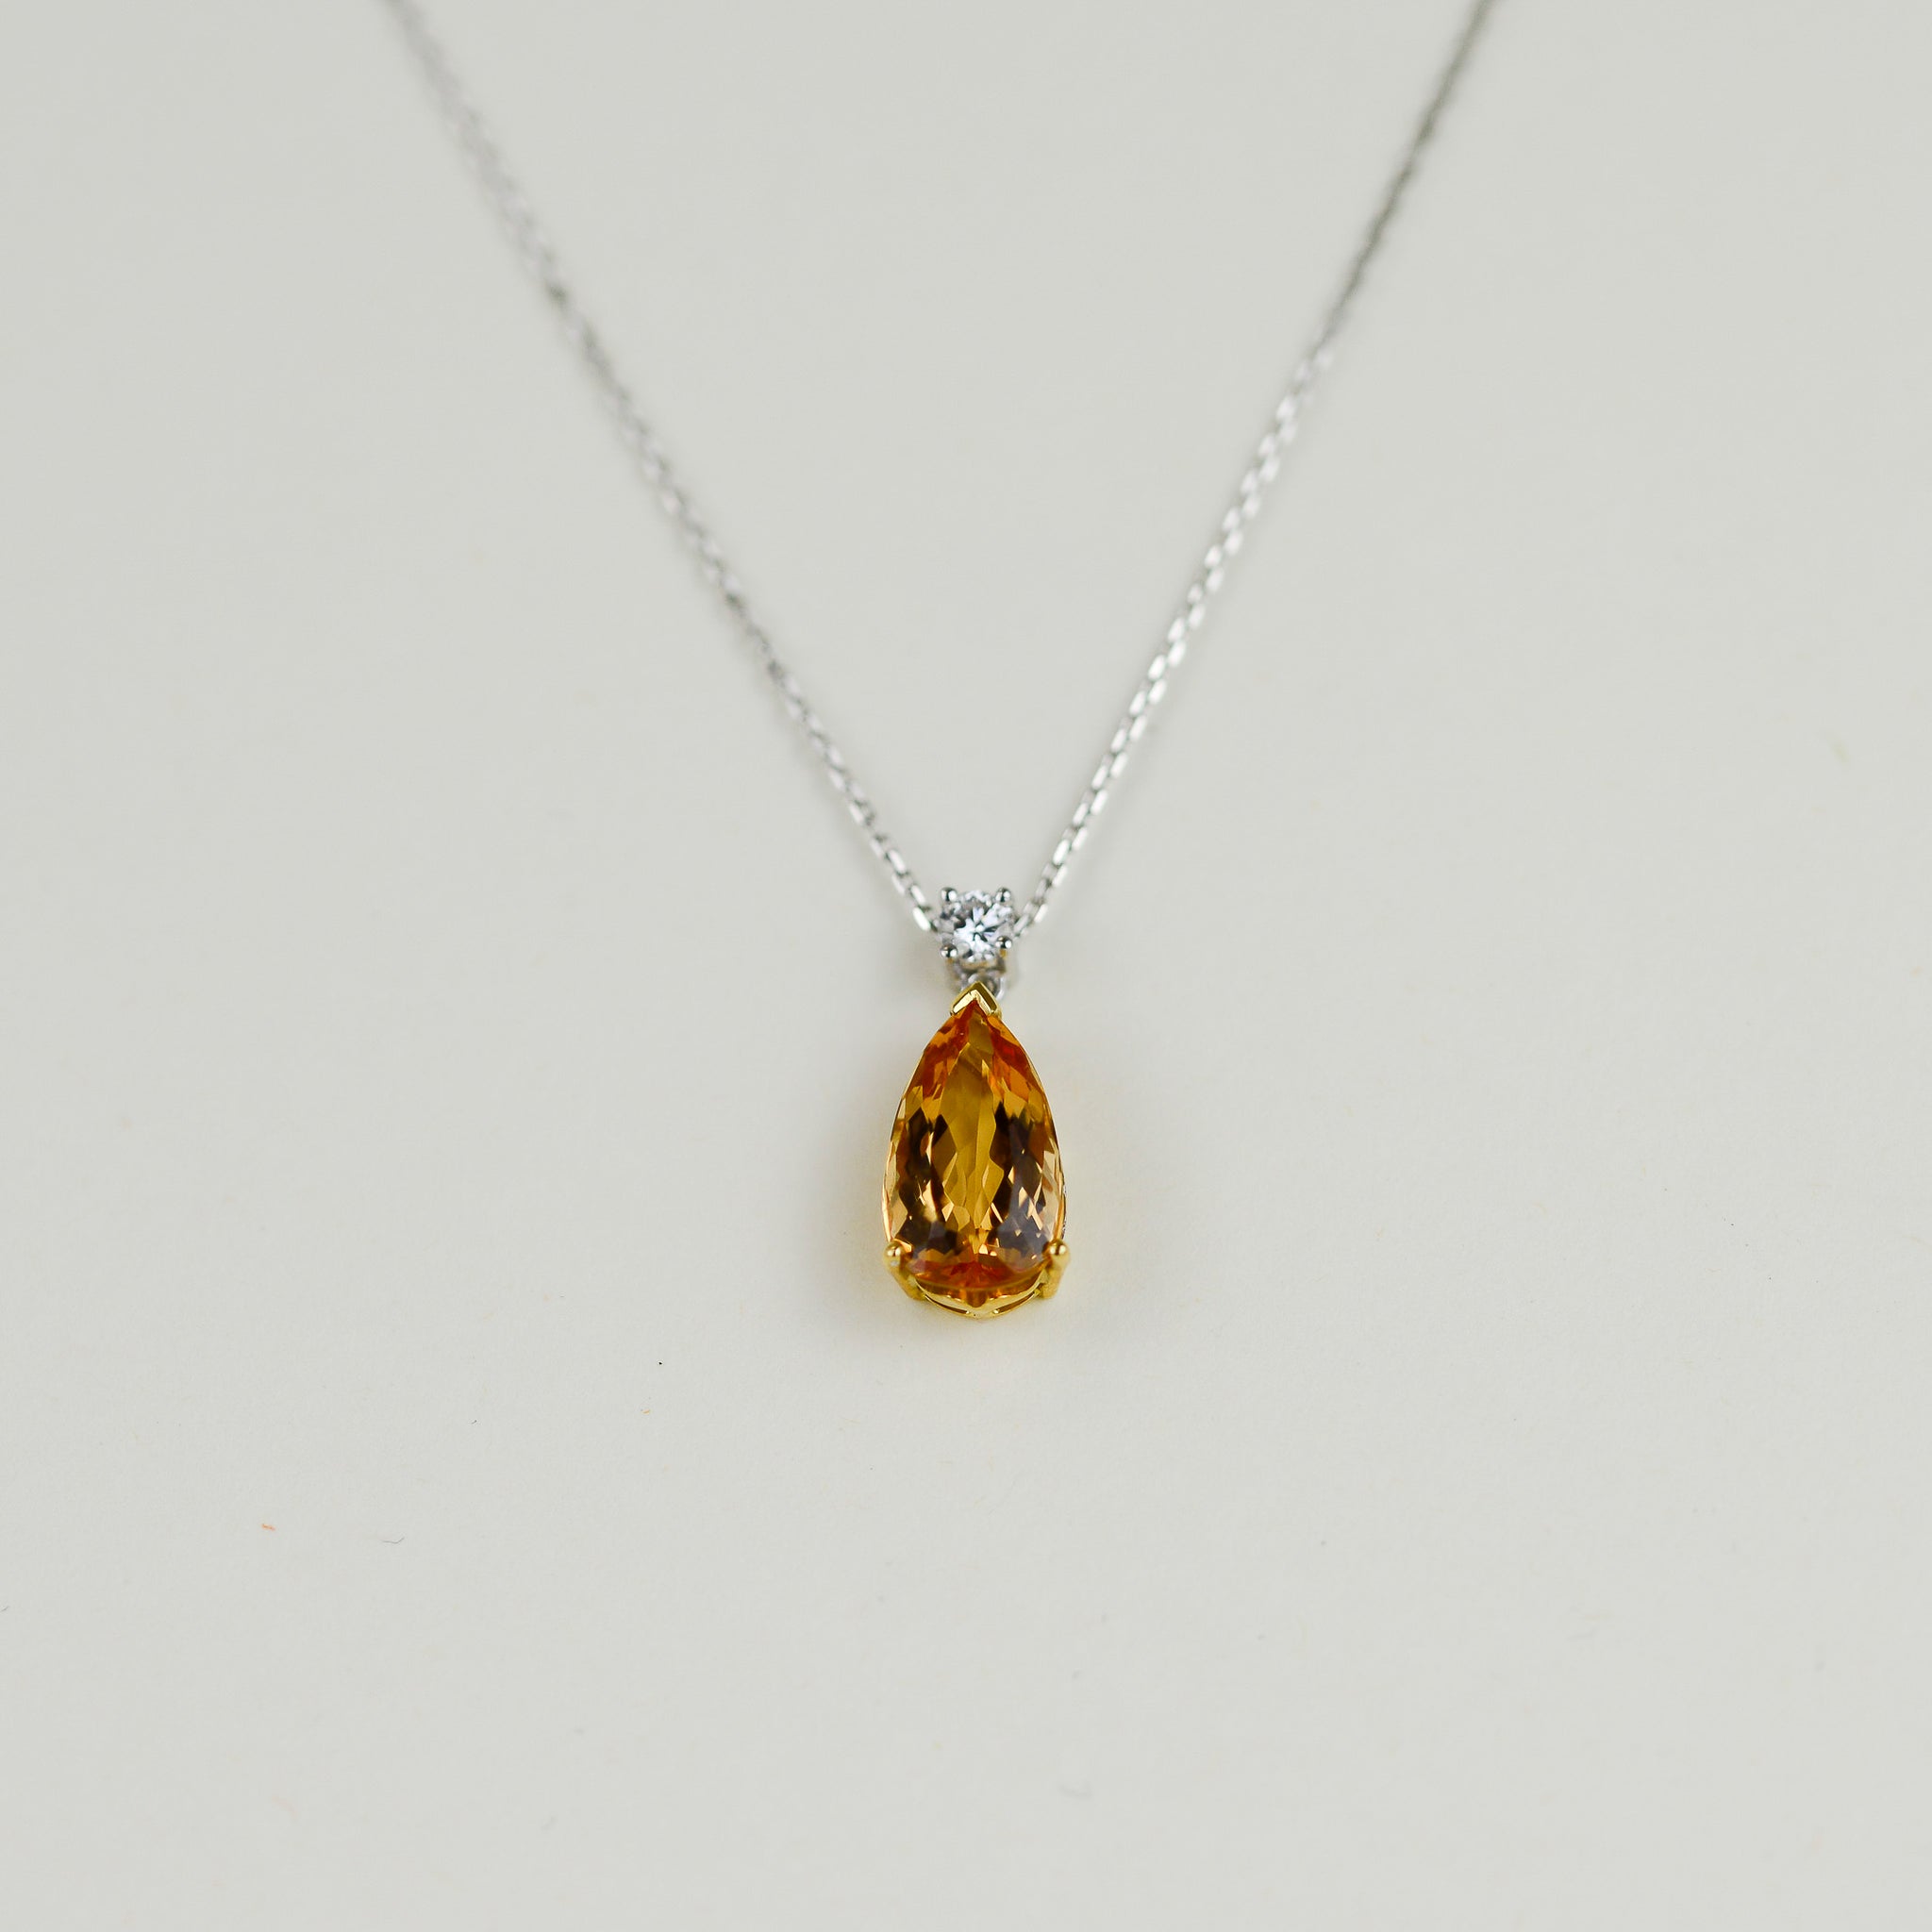 18ct Yellow & White Gold 4.61ct Pear Cut Imperial Topaz and 0.16ct Diamond Pendant